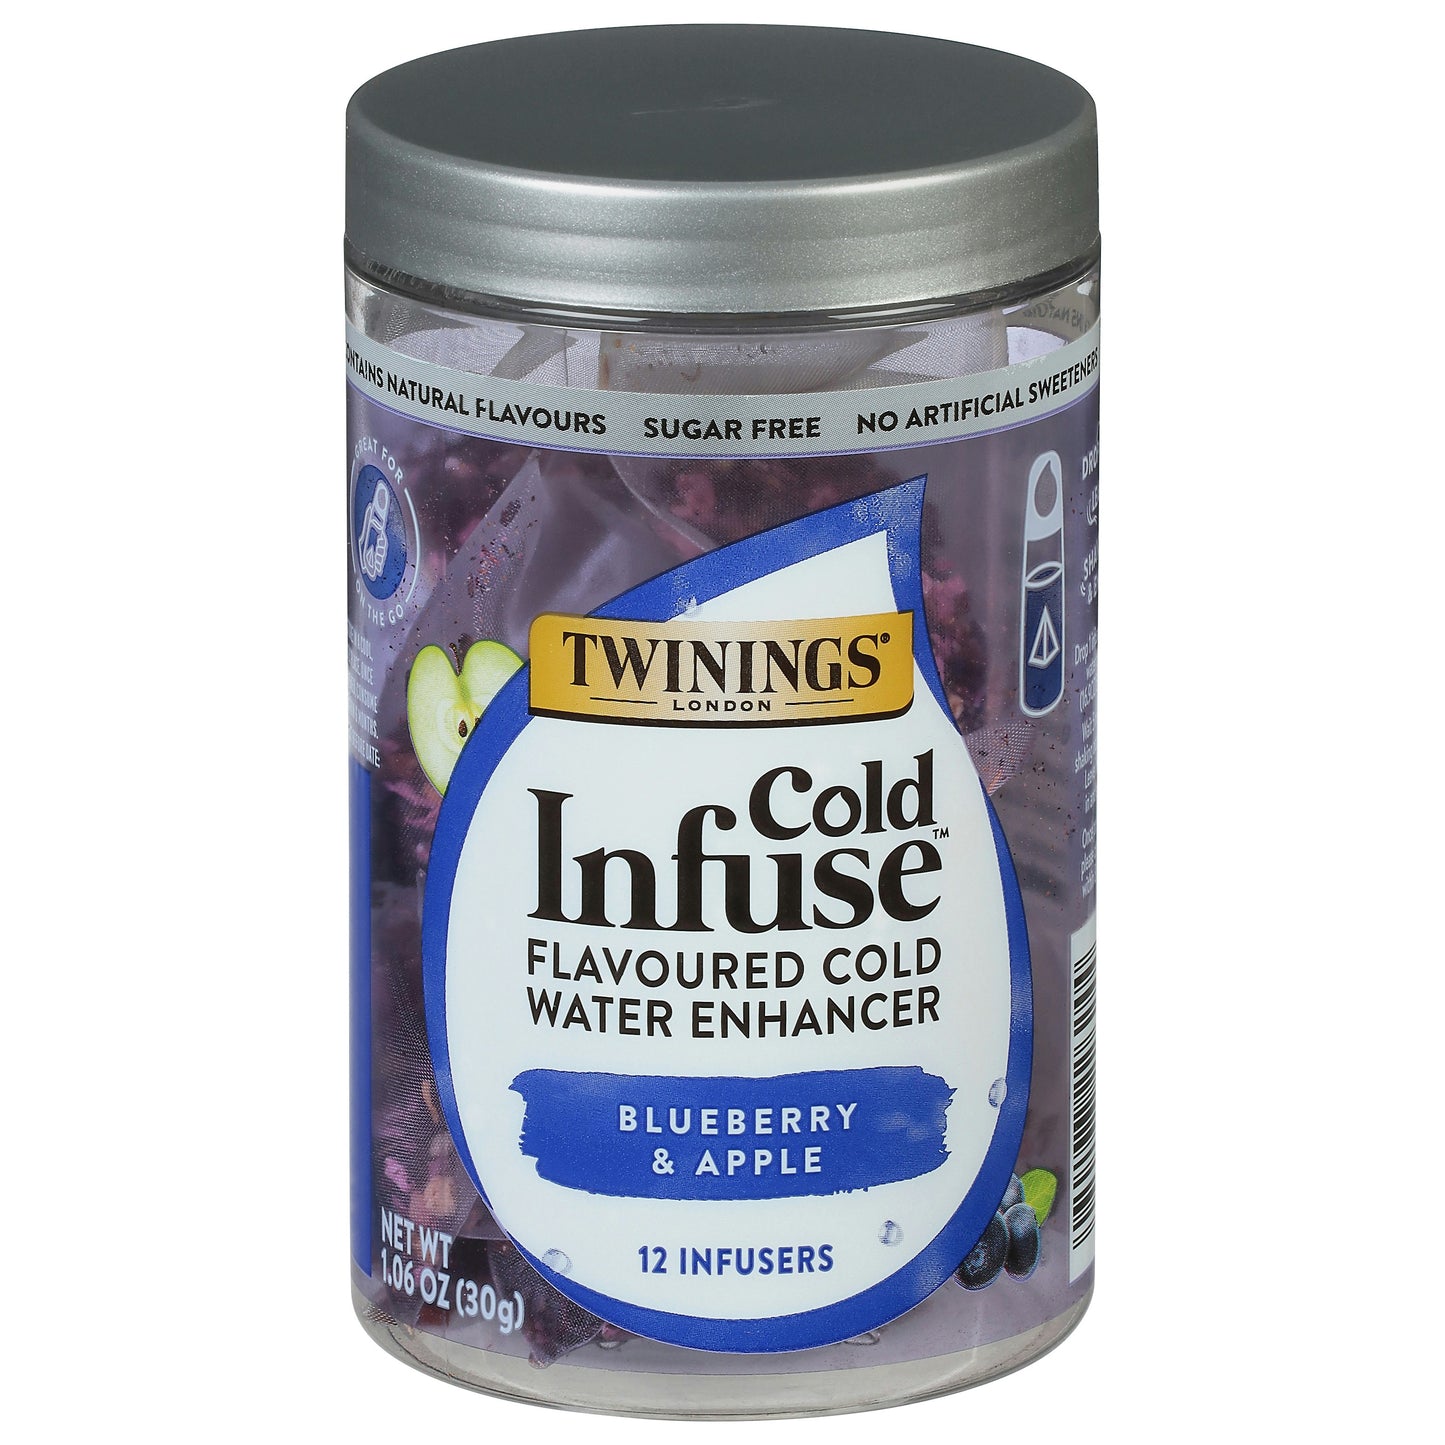 Twining Tea Tea Cold Infuse Blueberry Apple 12 Bag (Pack of 6)